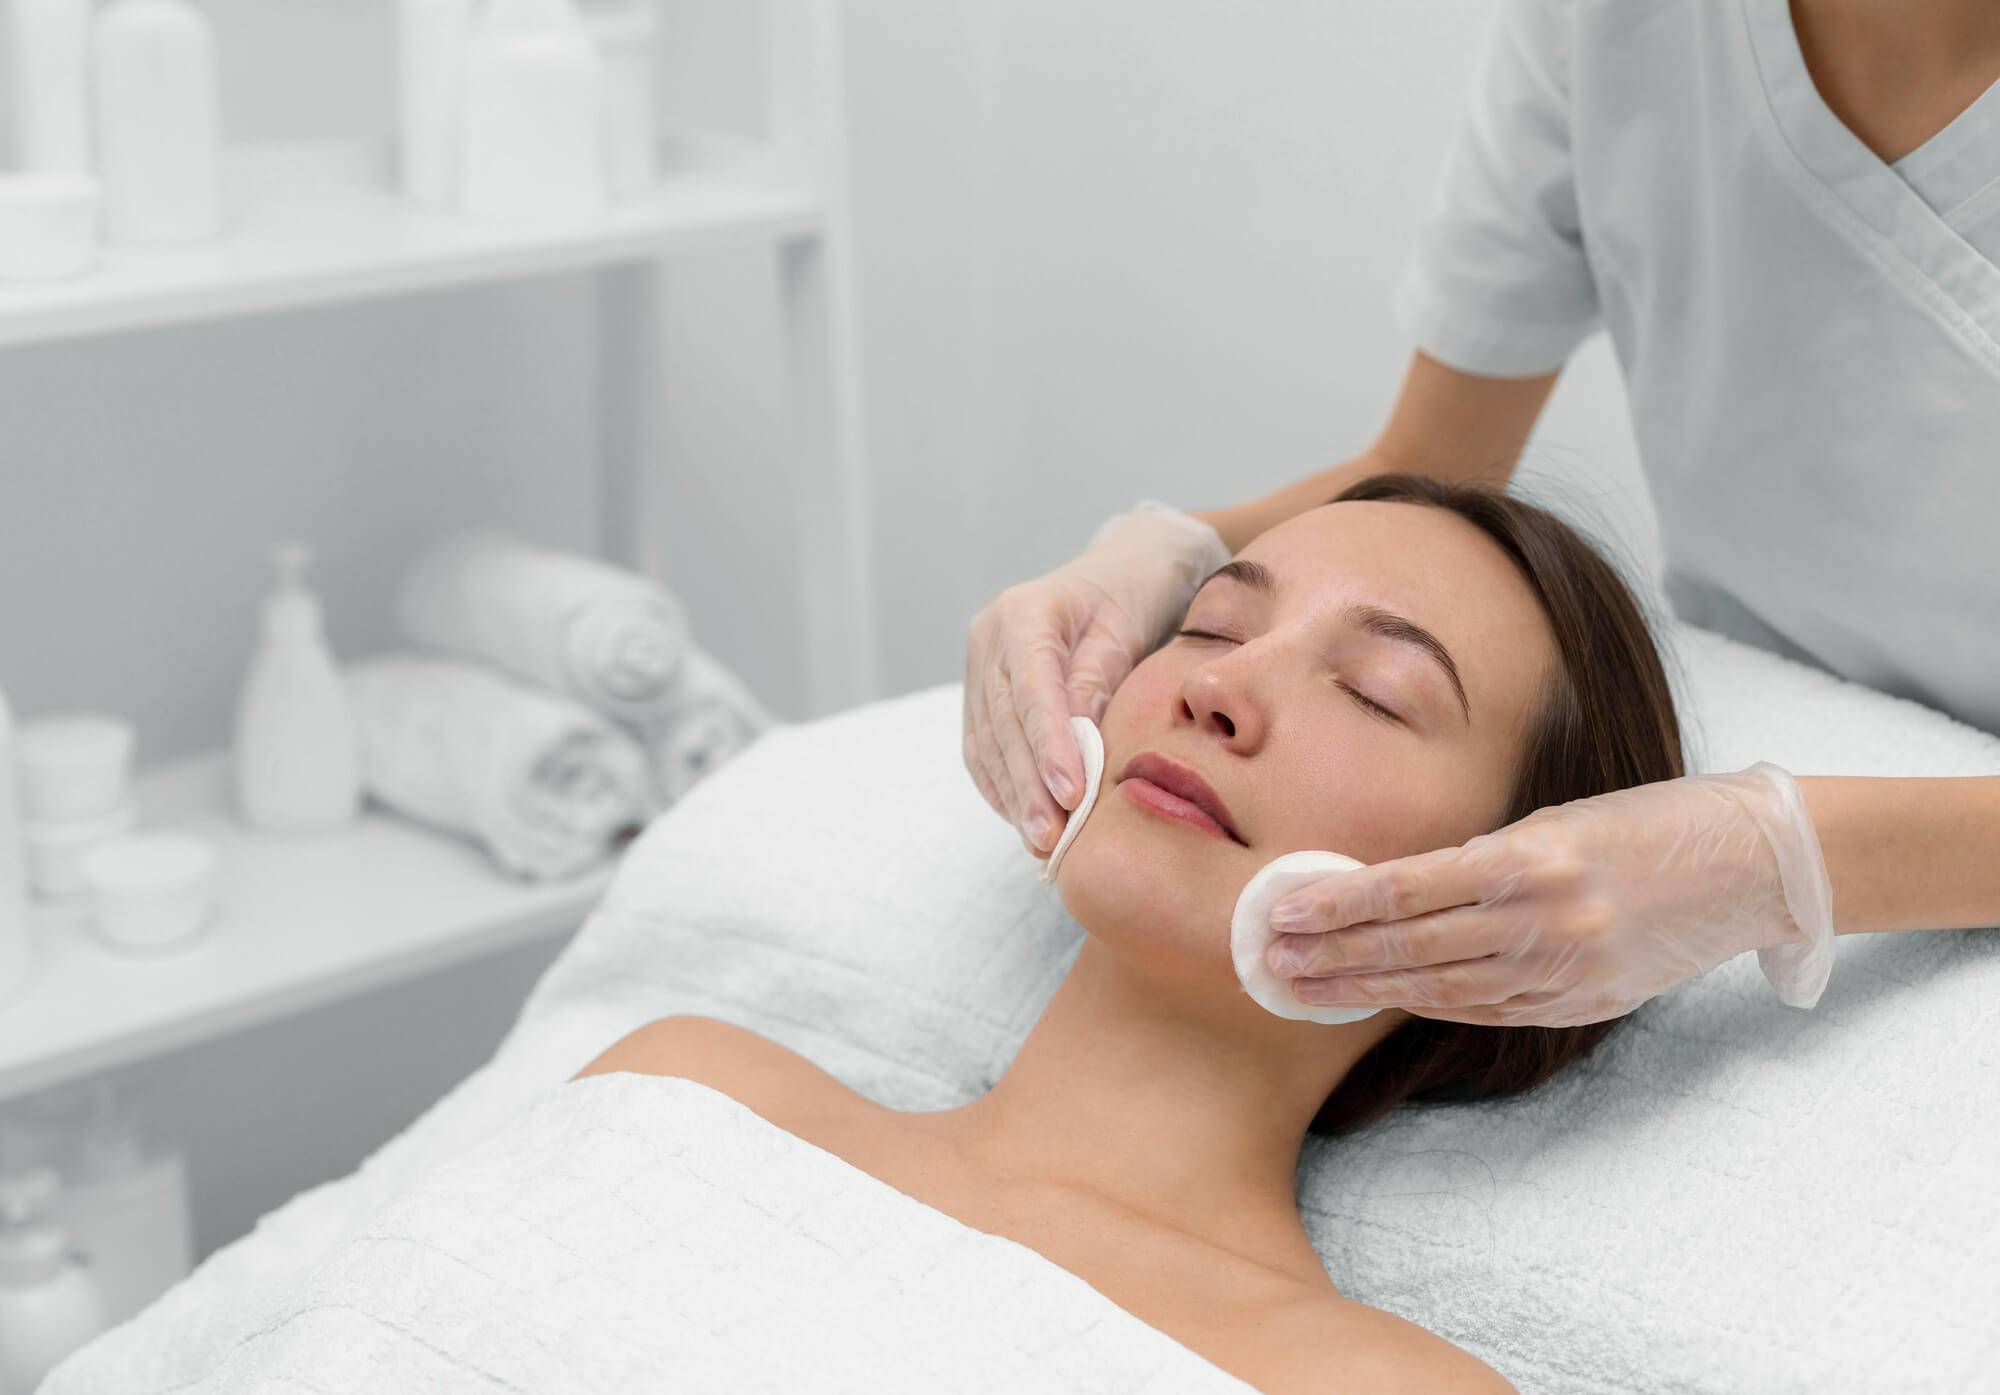 salon and spa,best massage spa in mumbai,salon and spa near me,aesthetic salon and spa, Basic Aromatherapy Facial with Clean Up